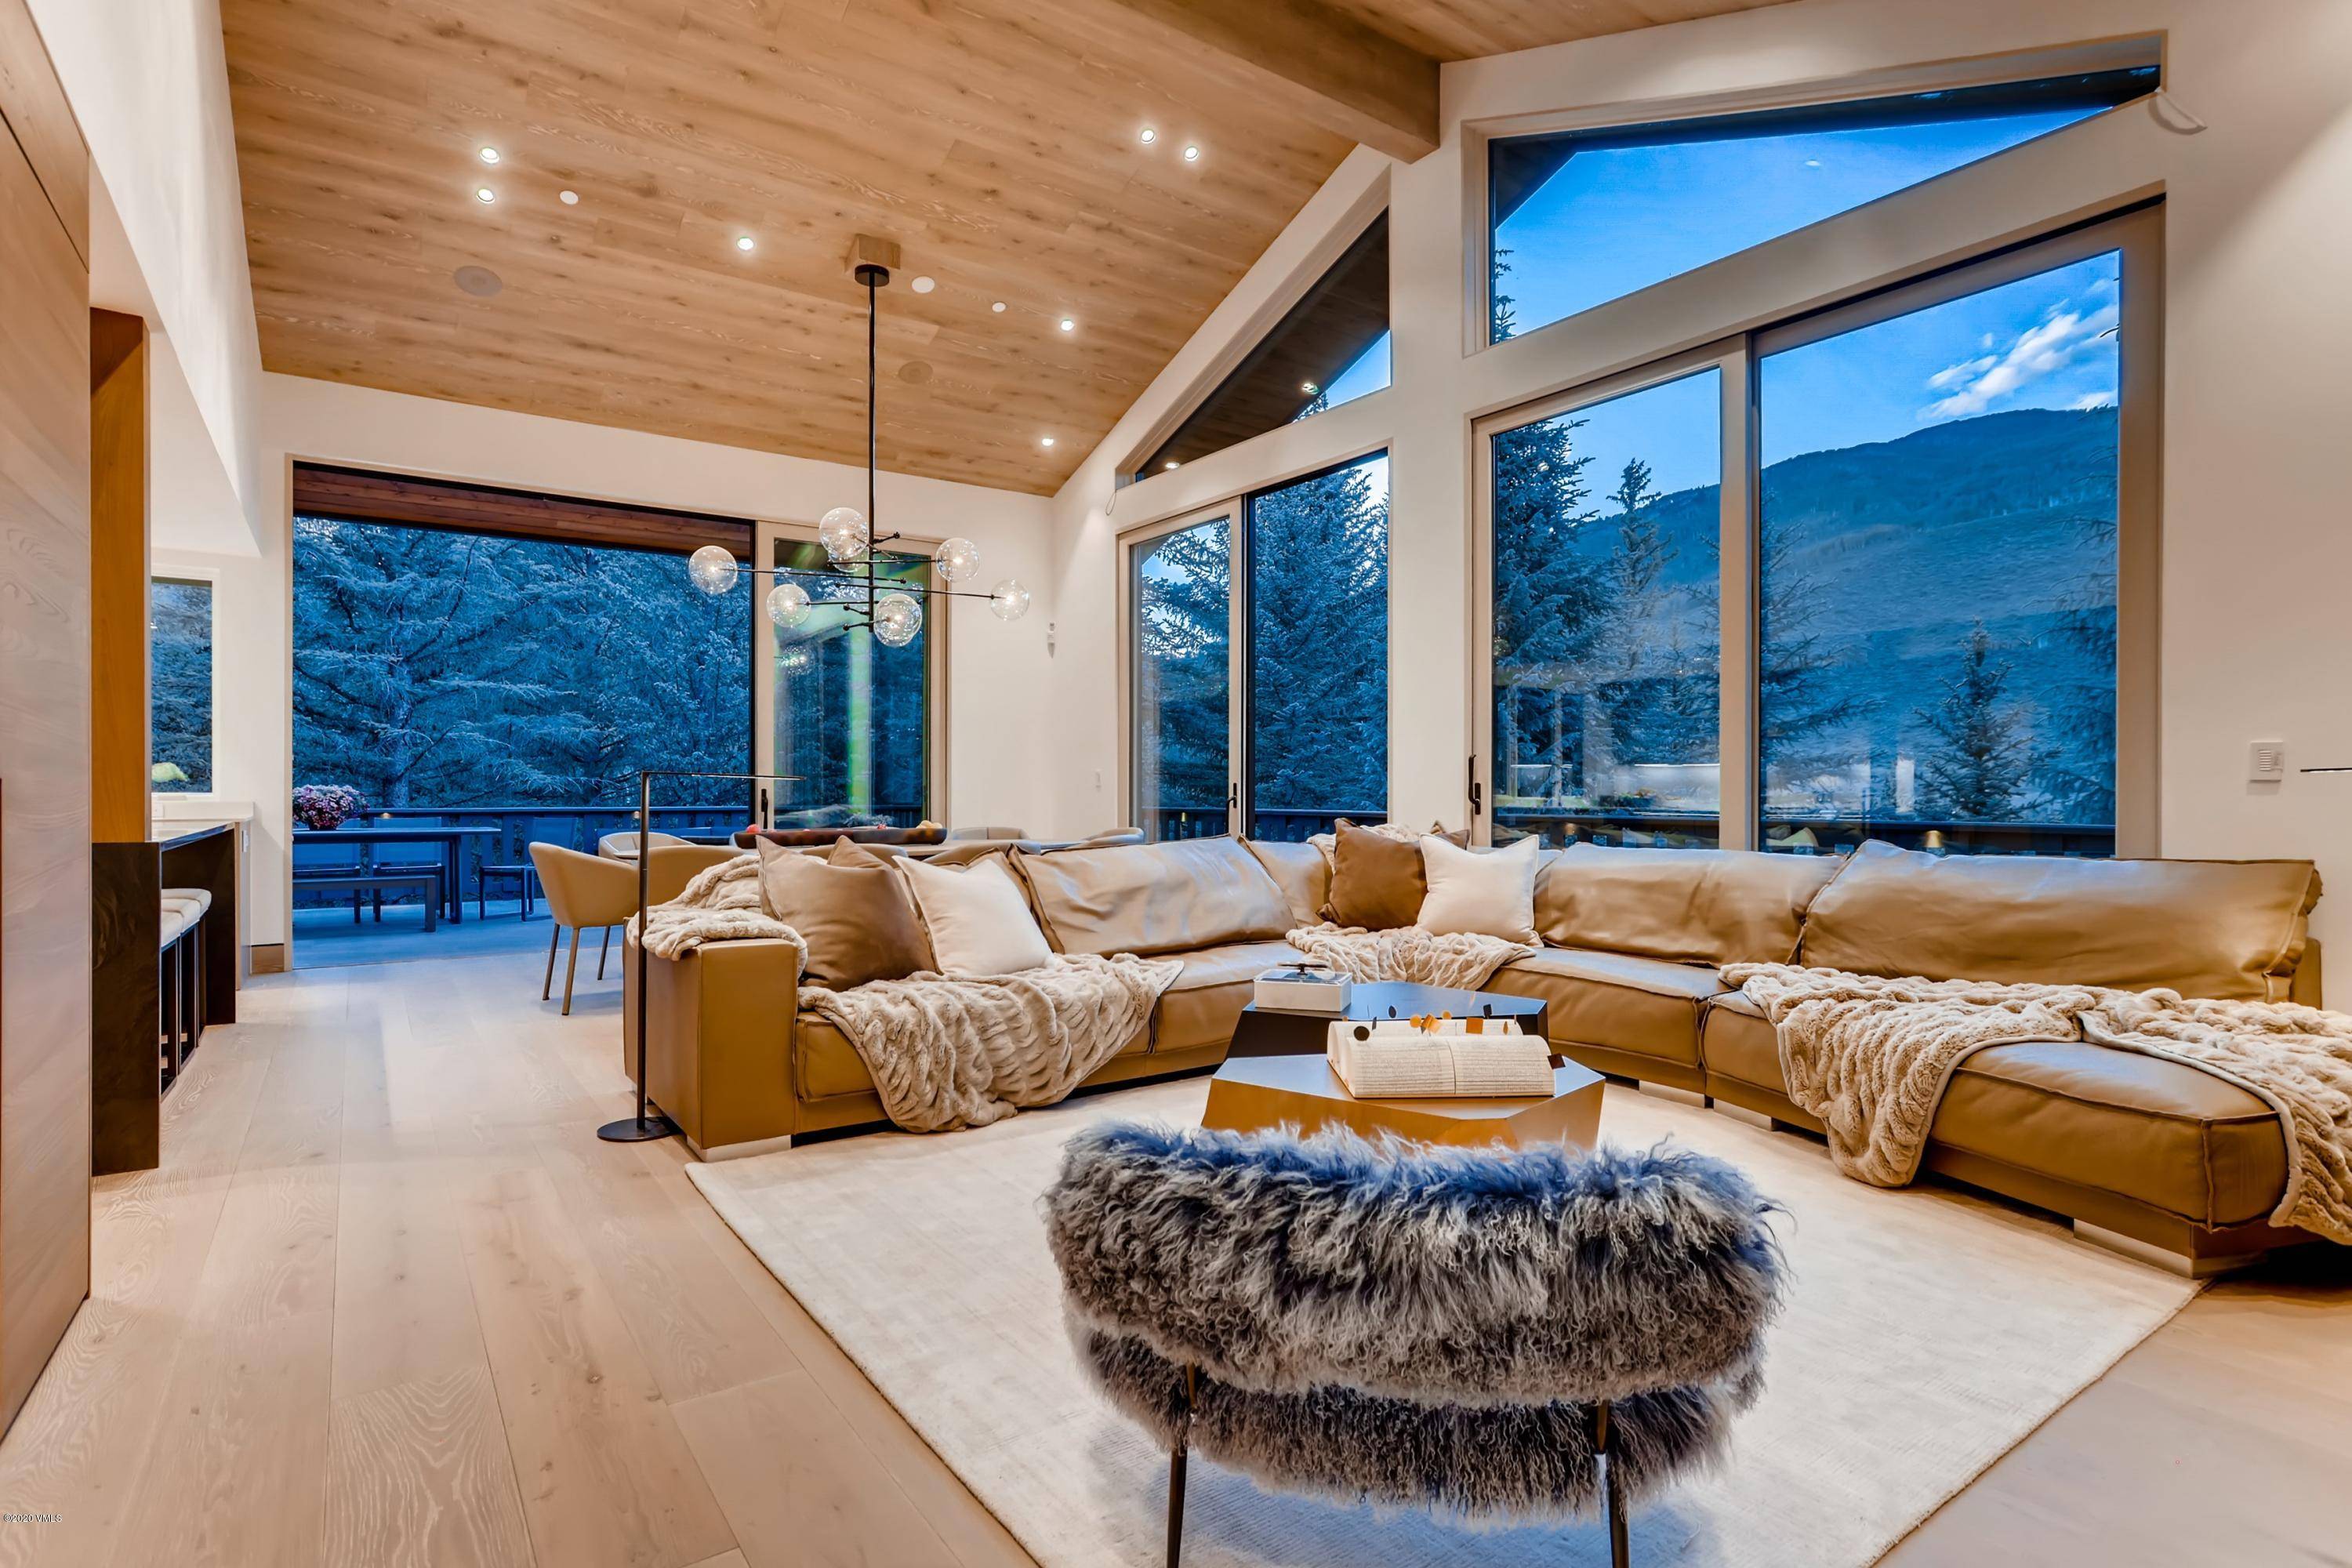 Completely renovated and expanded 355 Forest Road is a contemporary home nestled among the aspens in a private tranquil setting.